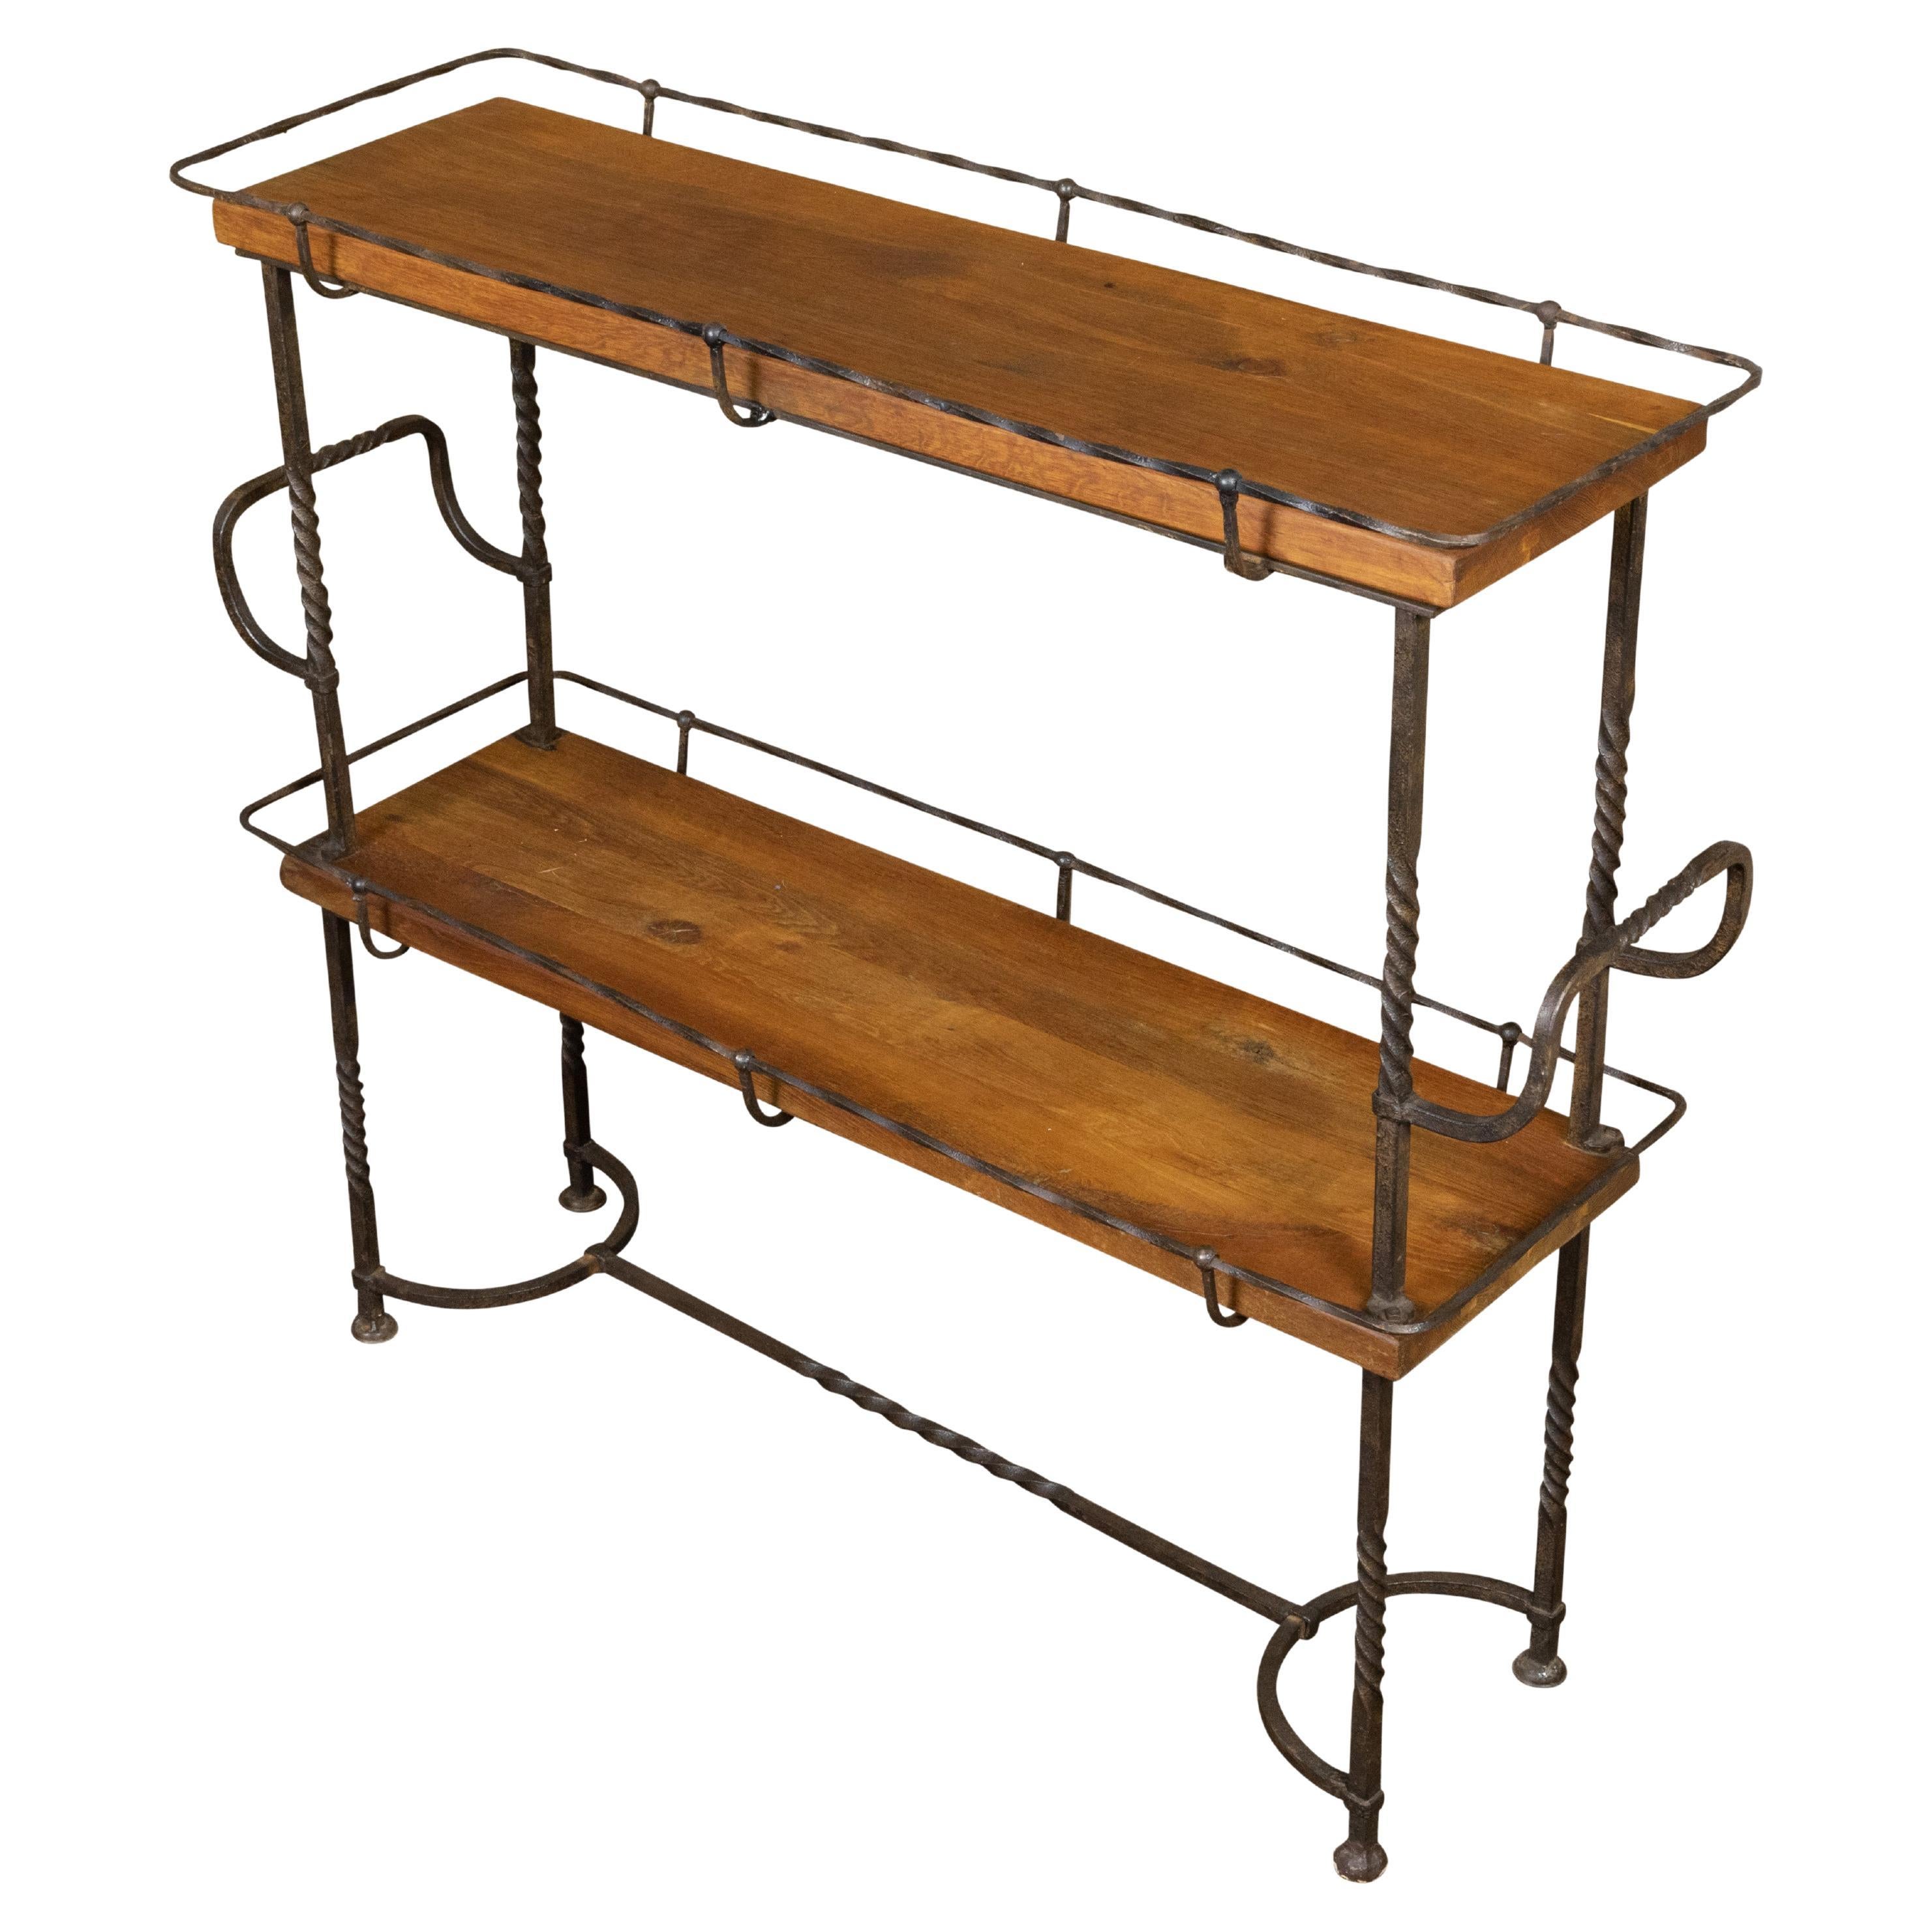 American Midcentury Metal and Wood Two-Tiered Shelving Unit with Twisted Motifs